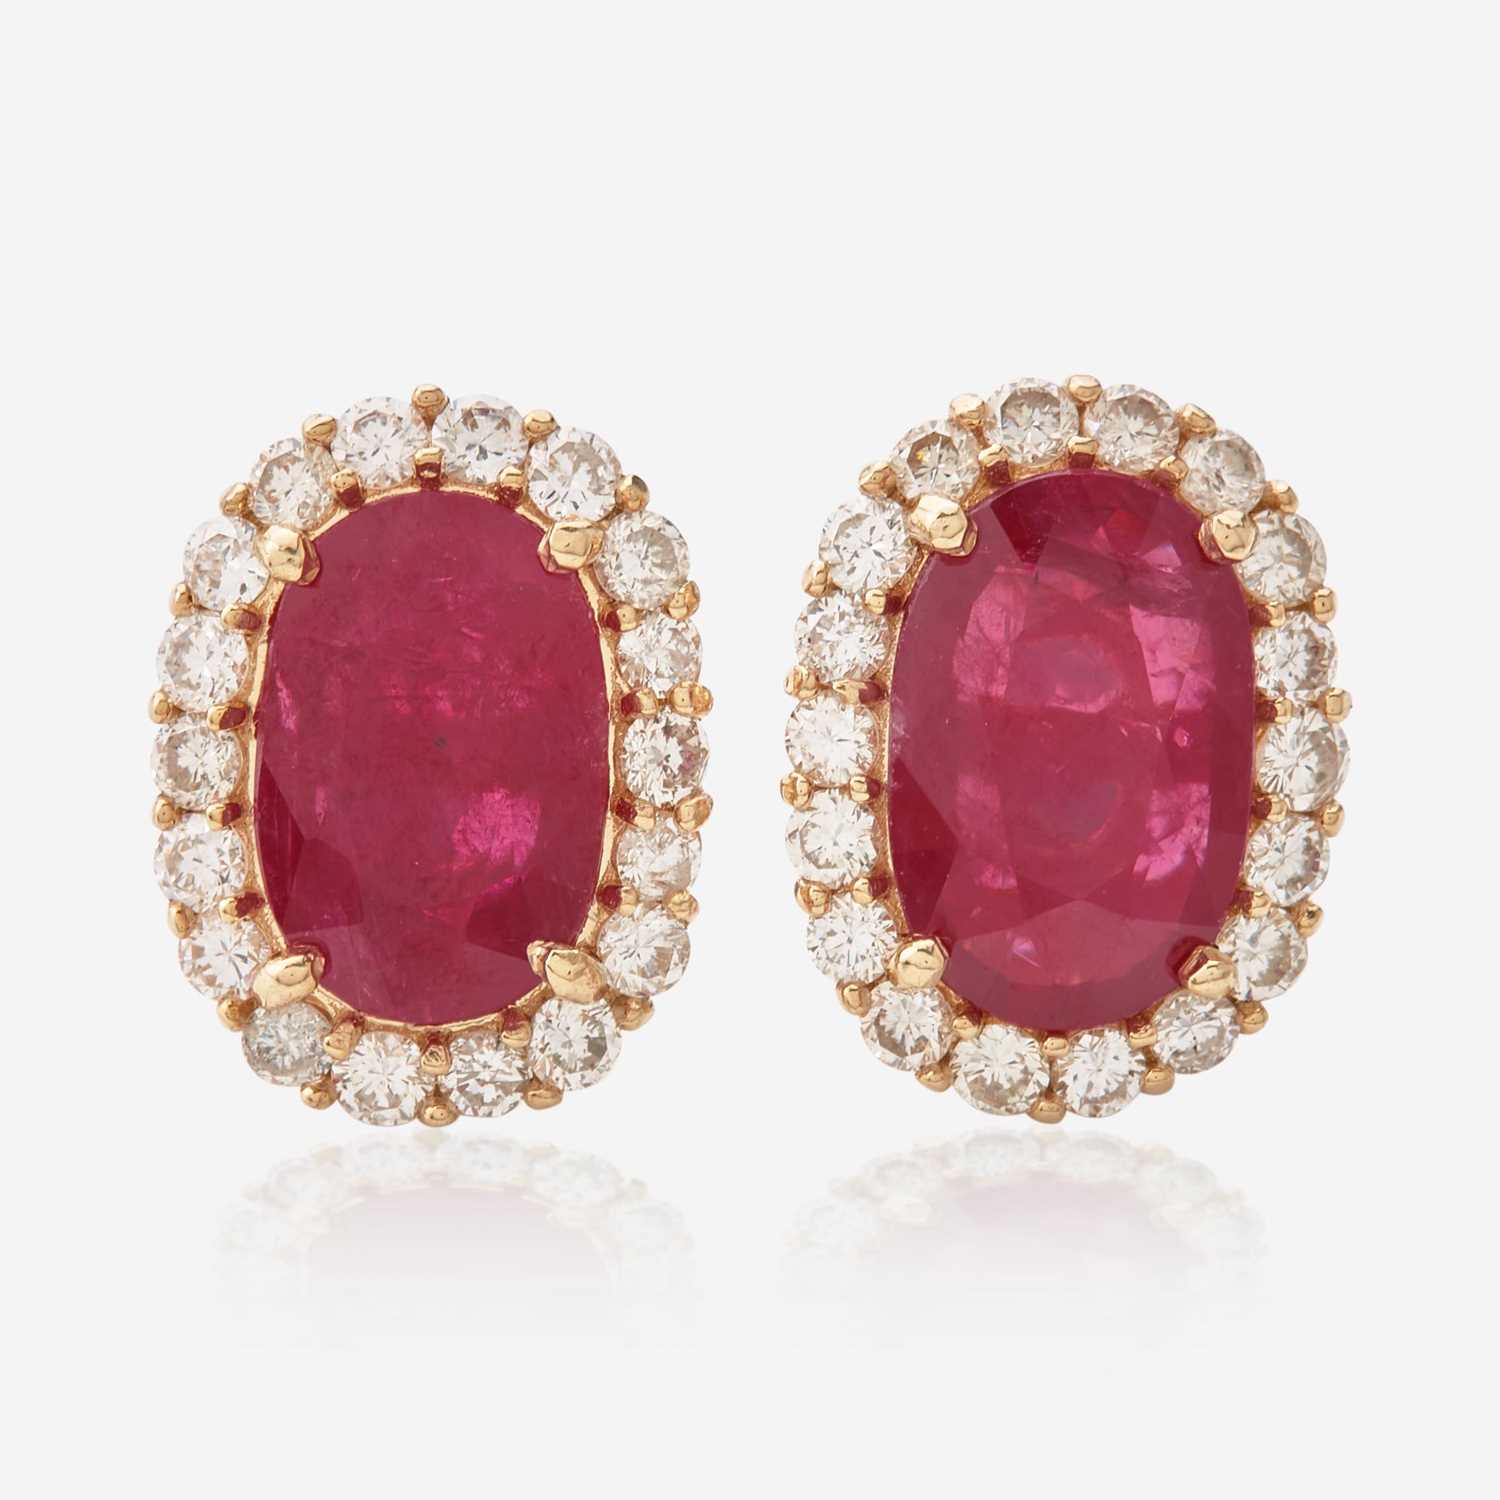 Lot 24 - A Pair of 18K Gold, Ruby, and Diamond Earrings